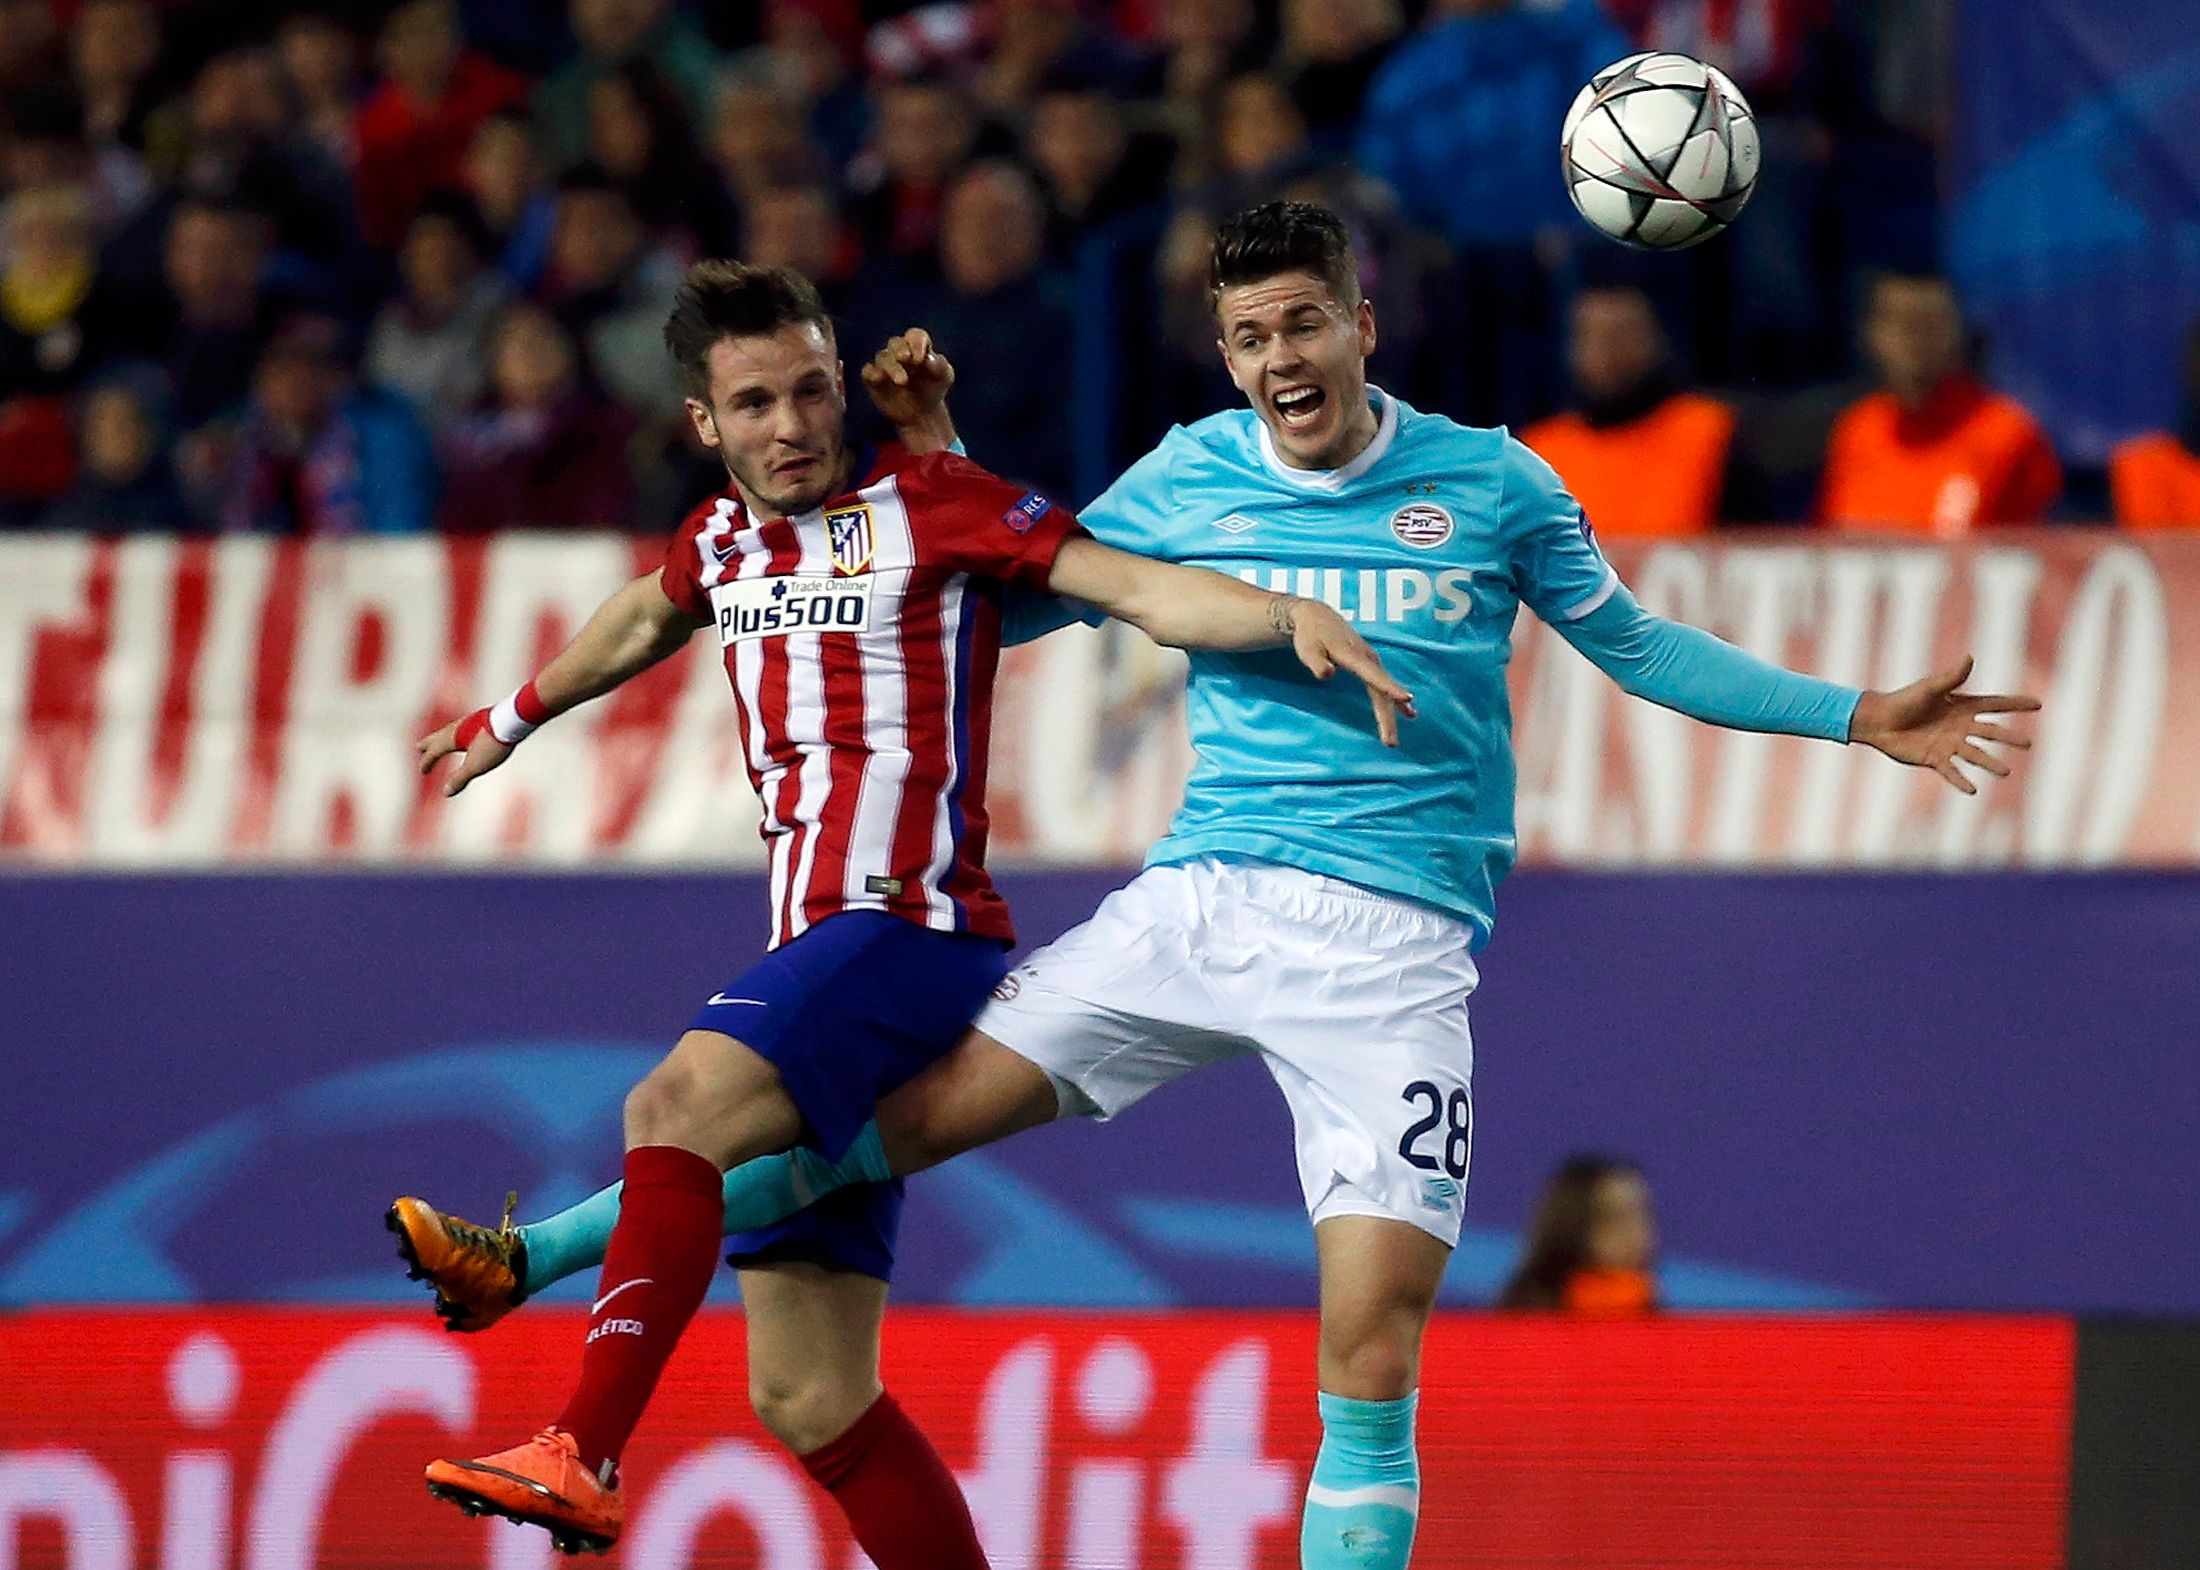 Football Soccer - Atletico Madrid v PSV Eindhoven  - UEFA Champions League Round of 16 Second Leg - Vicente Calderon stadium, Madrid, Spain - 15/3/16 Atletico Madrid's Saul Niguez in action against PSV Eindhoven's Marco van Ginkel.    REUTERS/Susana Vera   
Picture Supplied by Action Images